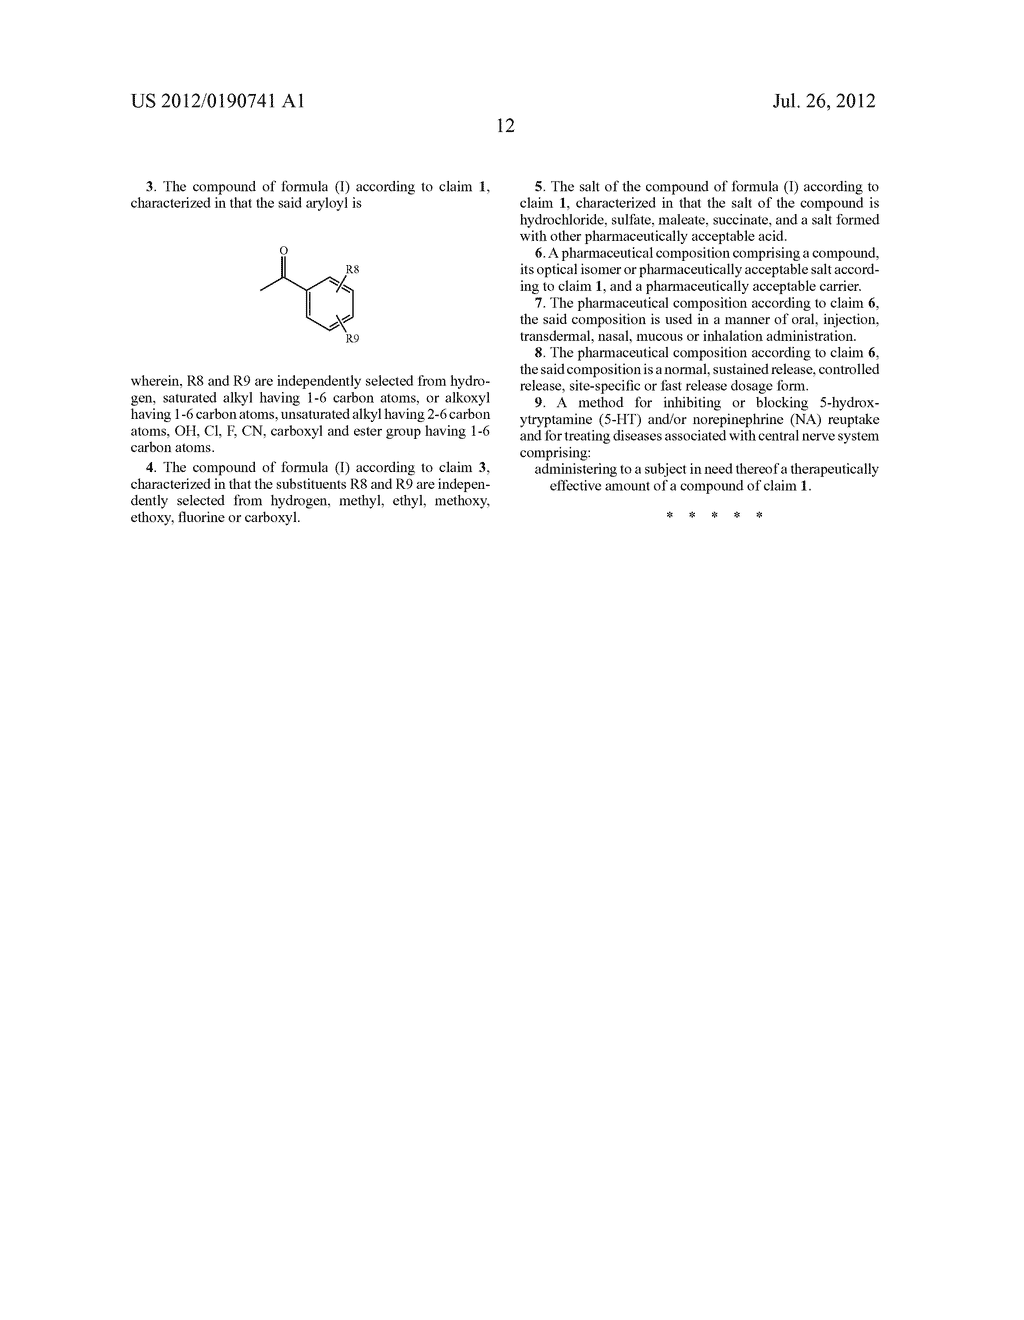 COMPOUNDS FOR INHIBITION OF 5-HYDROXYTRYPTAMINE AND NOREPINEPHRINE     REUPTAKE OR FOR TREATMENT OF DEPRESSION DISORDERS, THEIR PREPARATION     PROCESSES AND USES THEREOF - diagram, schematic, and image 15